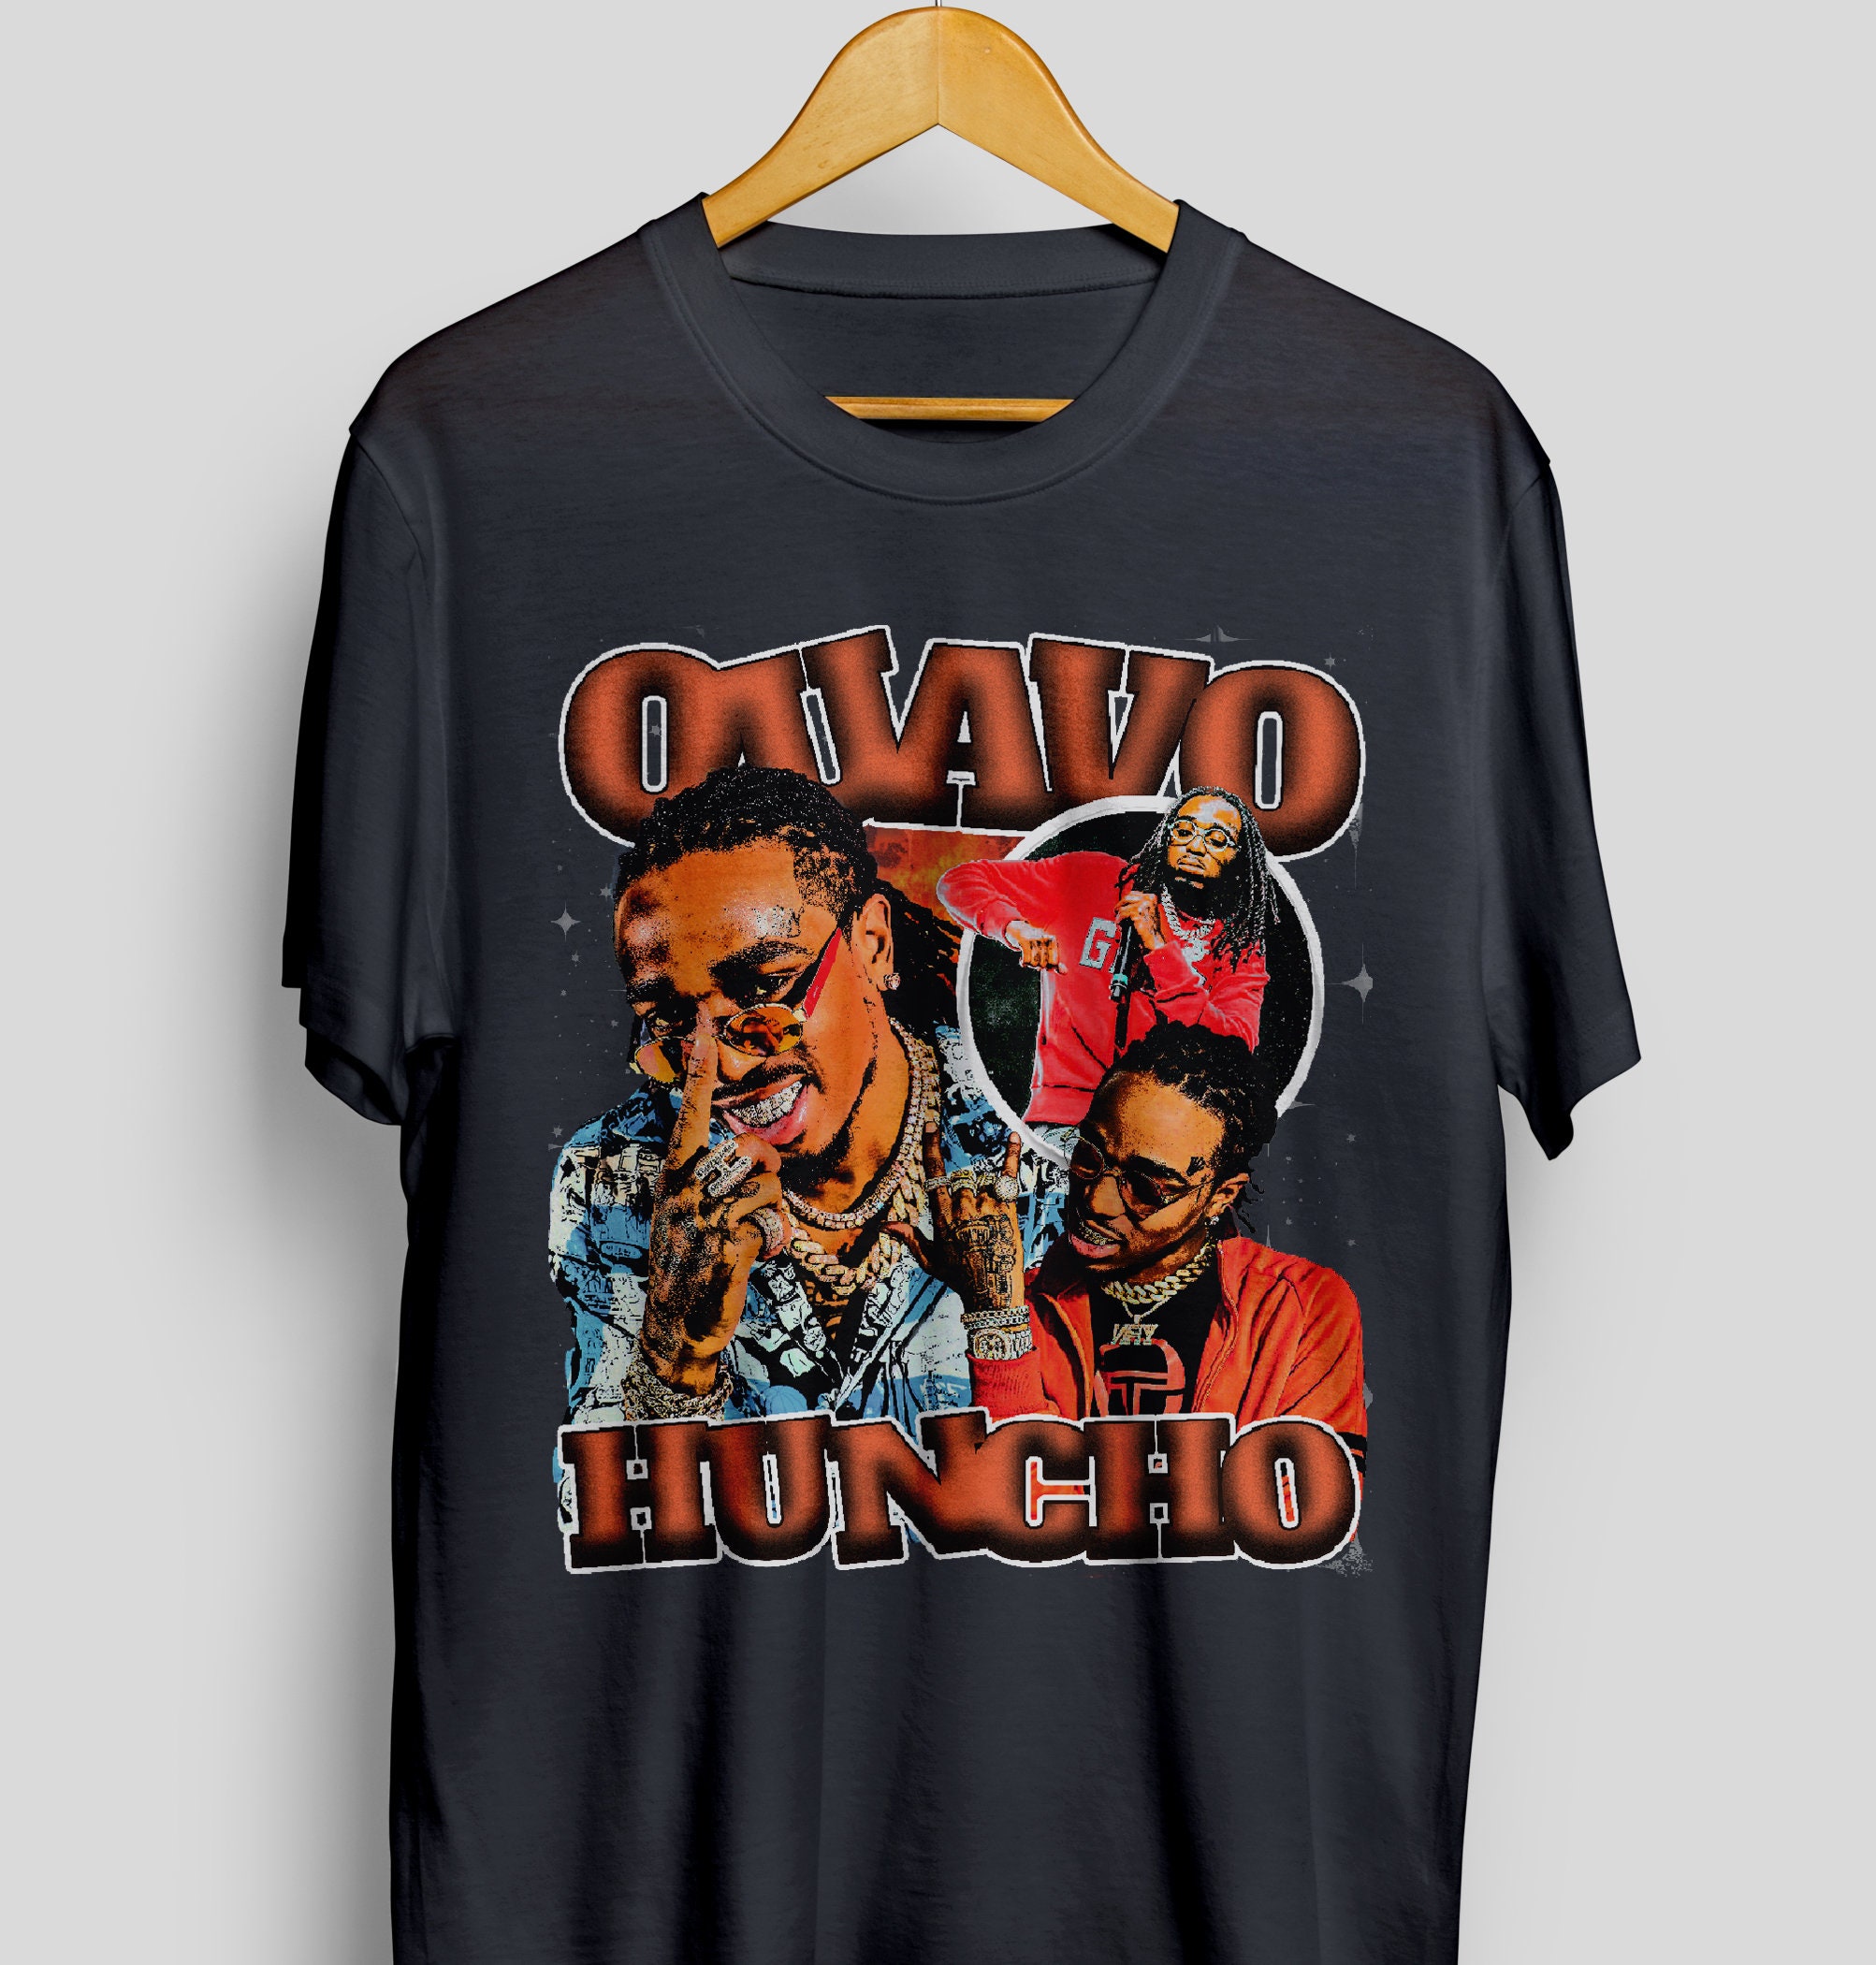 LouisVuitton Black Barecode and Earth #Tshirt worn by #Quavo #quavohuncho  at the #SummerJam June 2019 #outfits #spotern #look #…